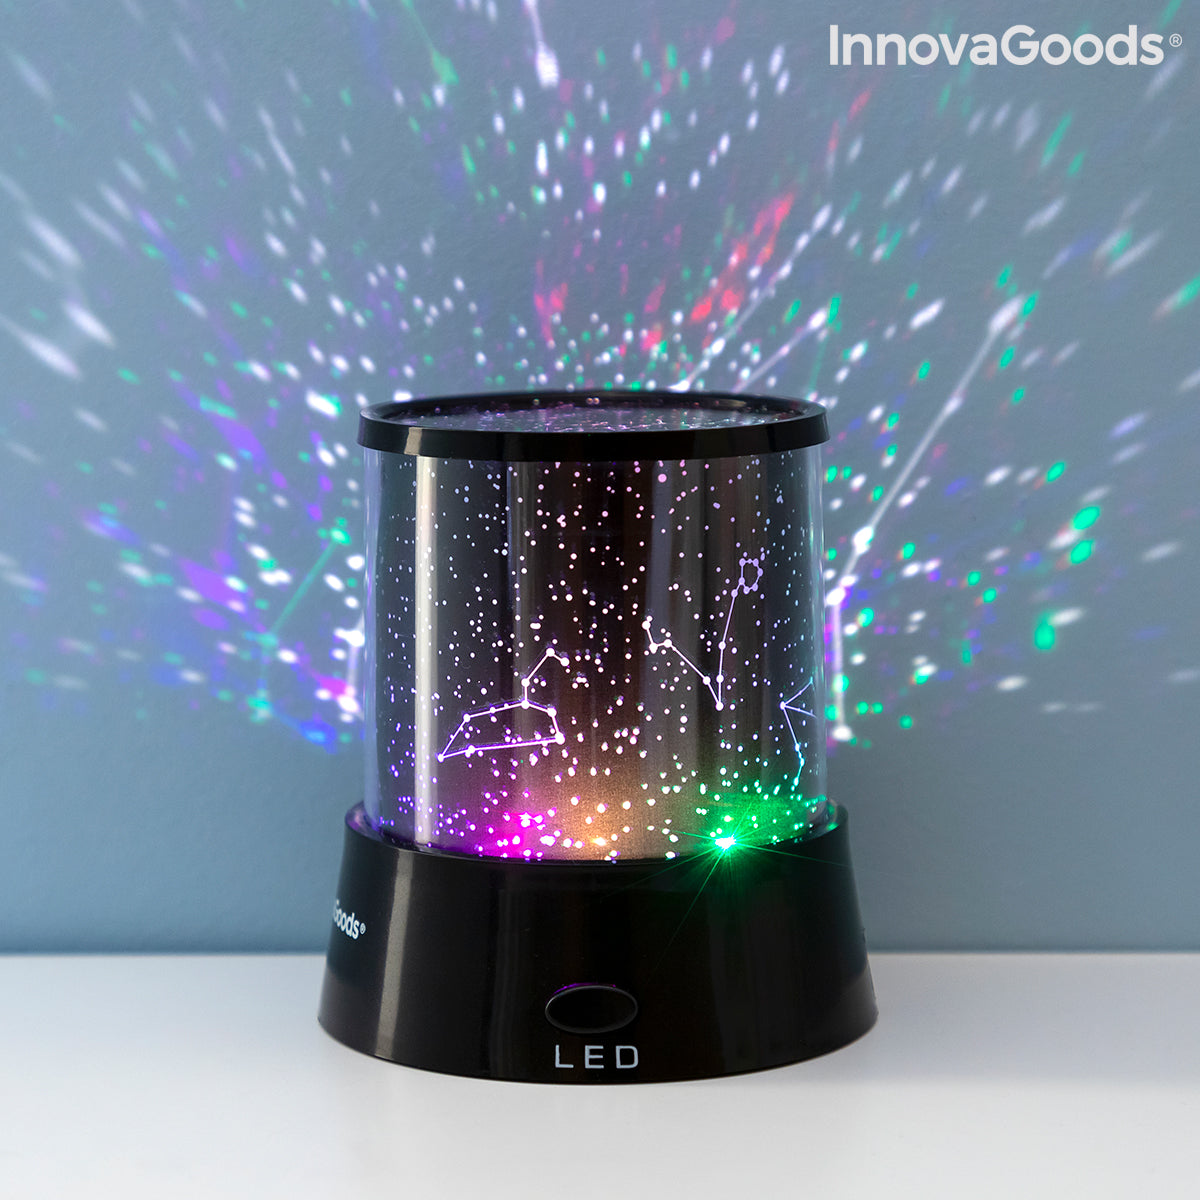 LED Galaxy projector Galedxy InnovaGoods